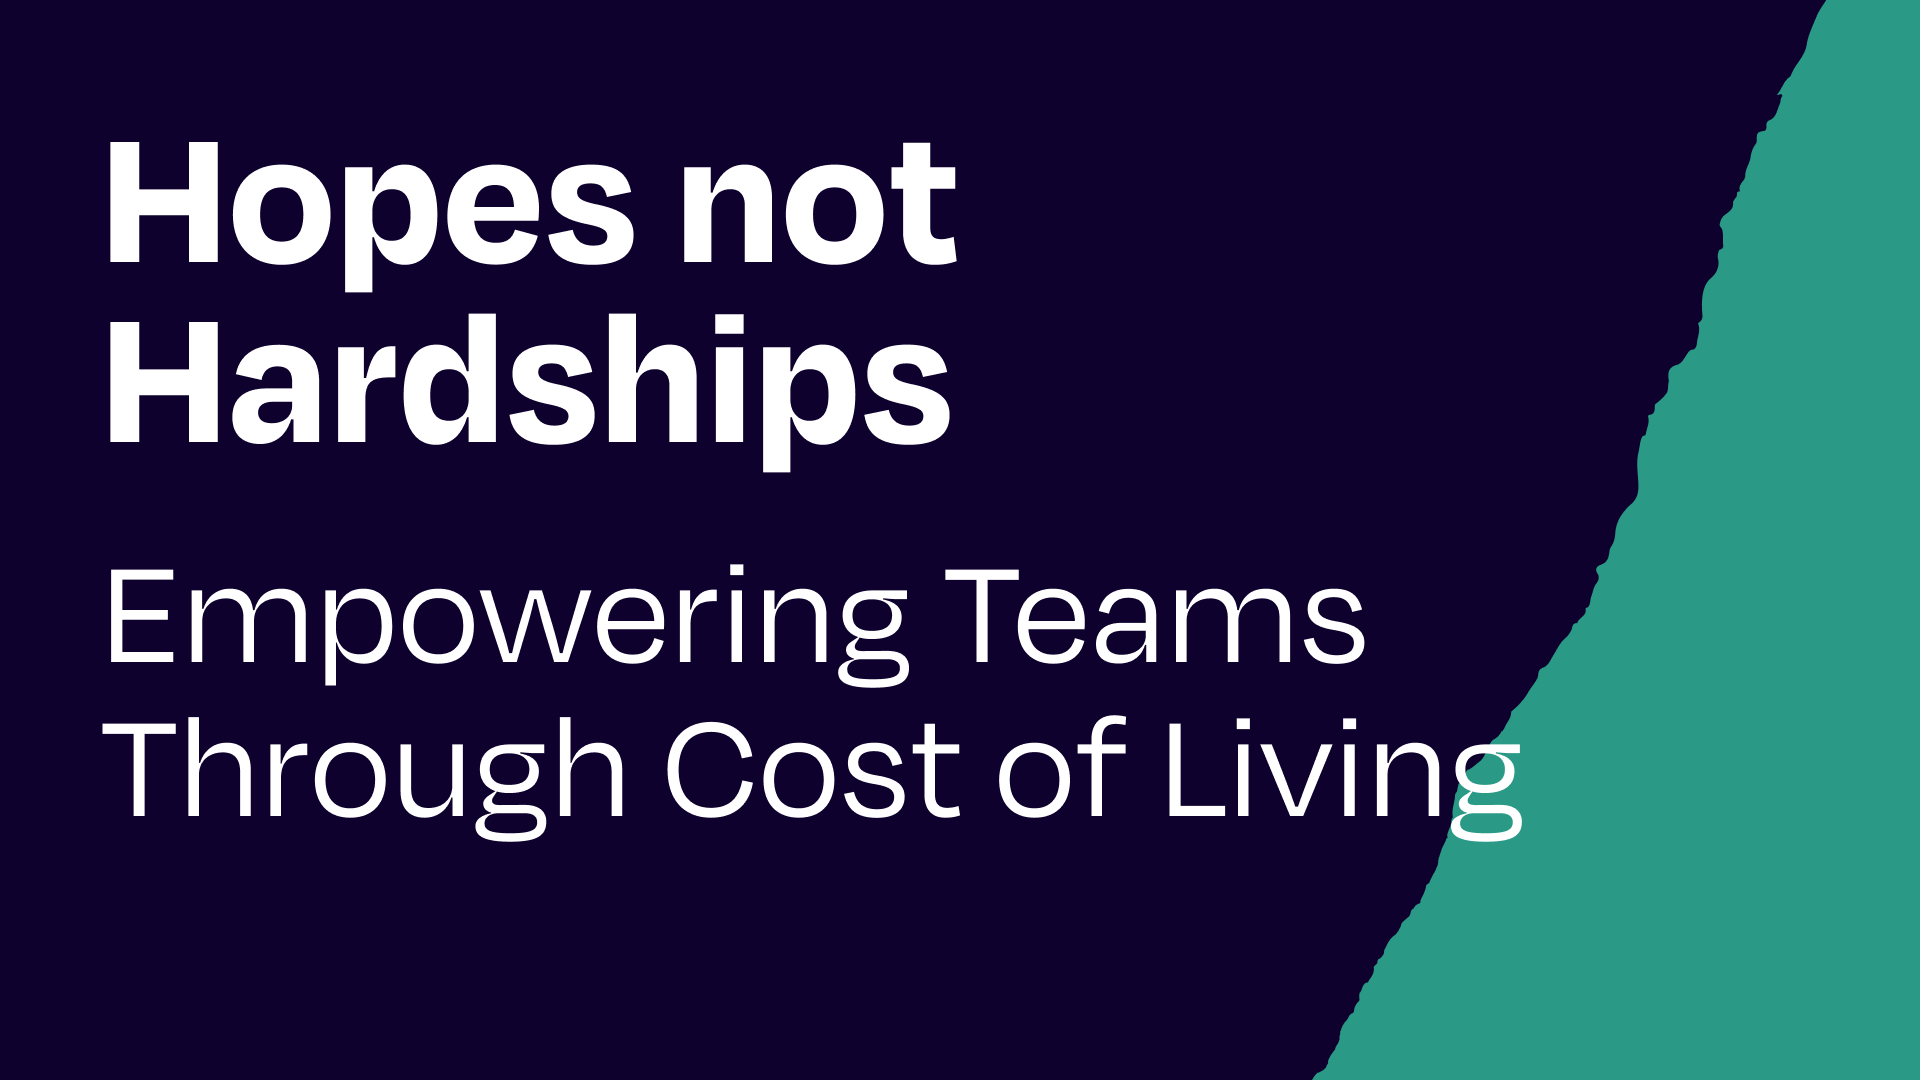 Hopes not hardships: empower teams to deal with rising costs of living!